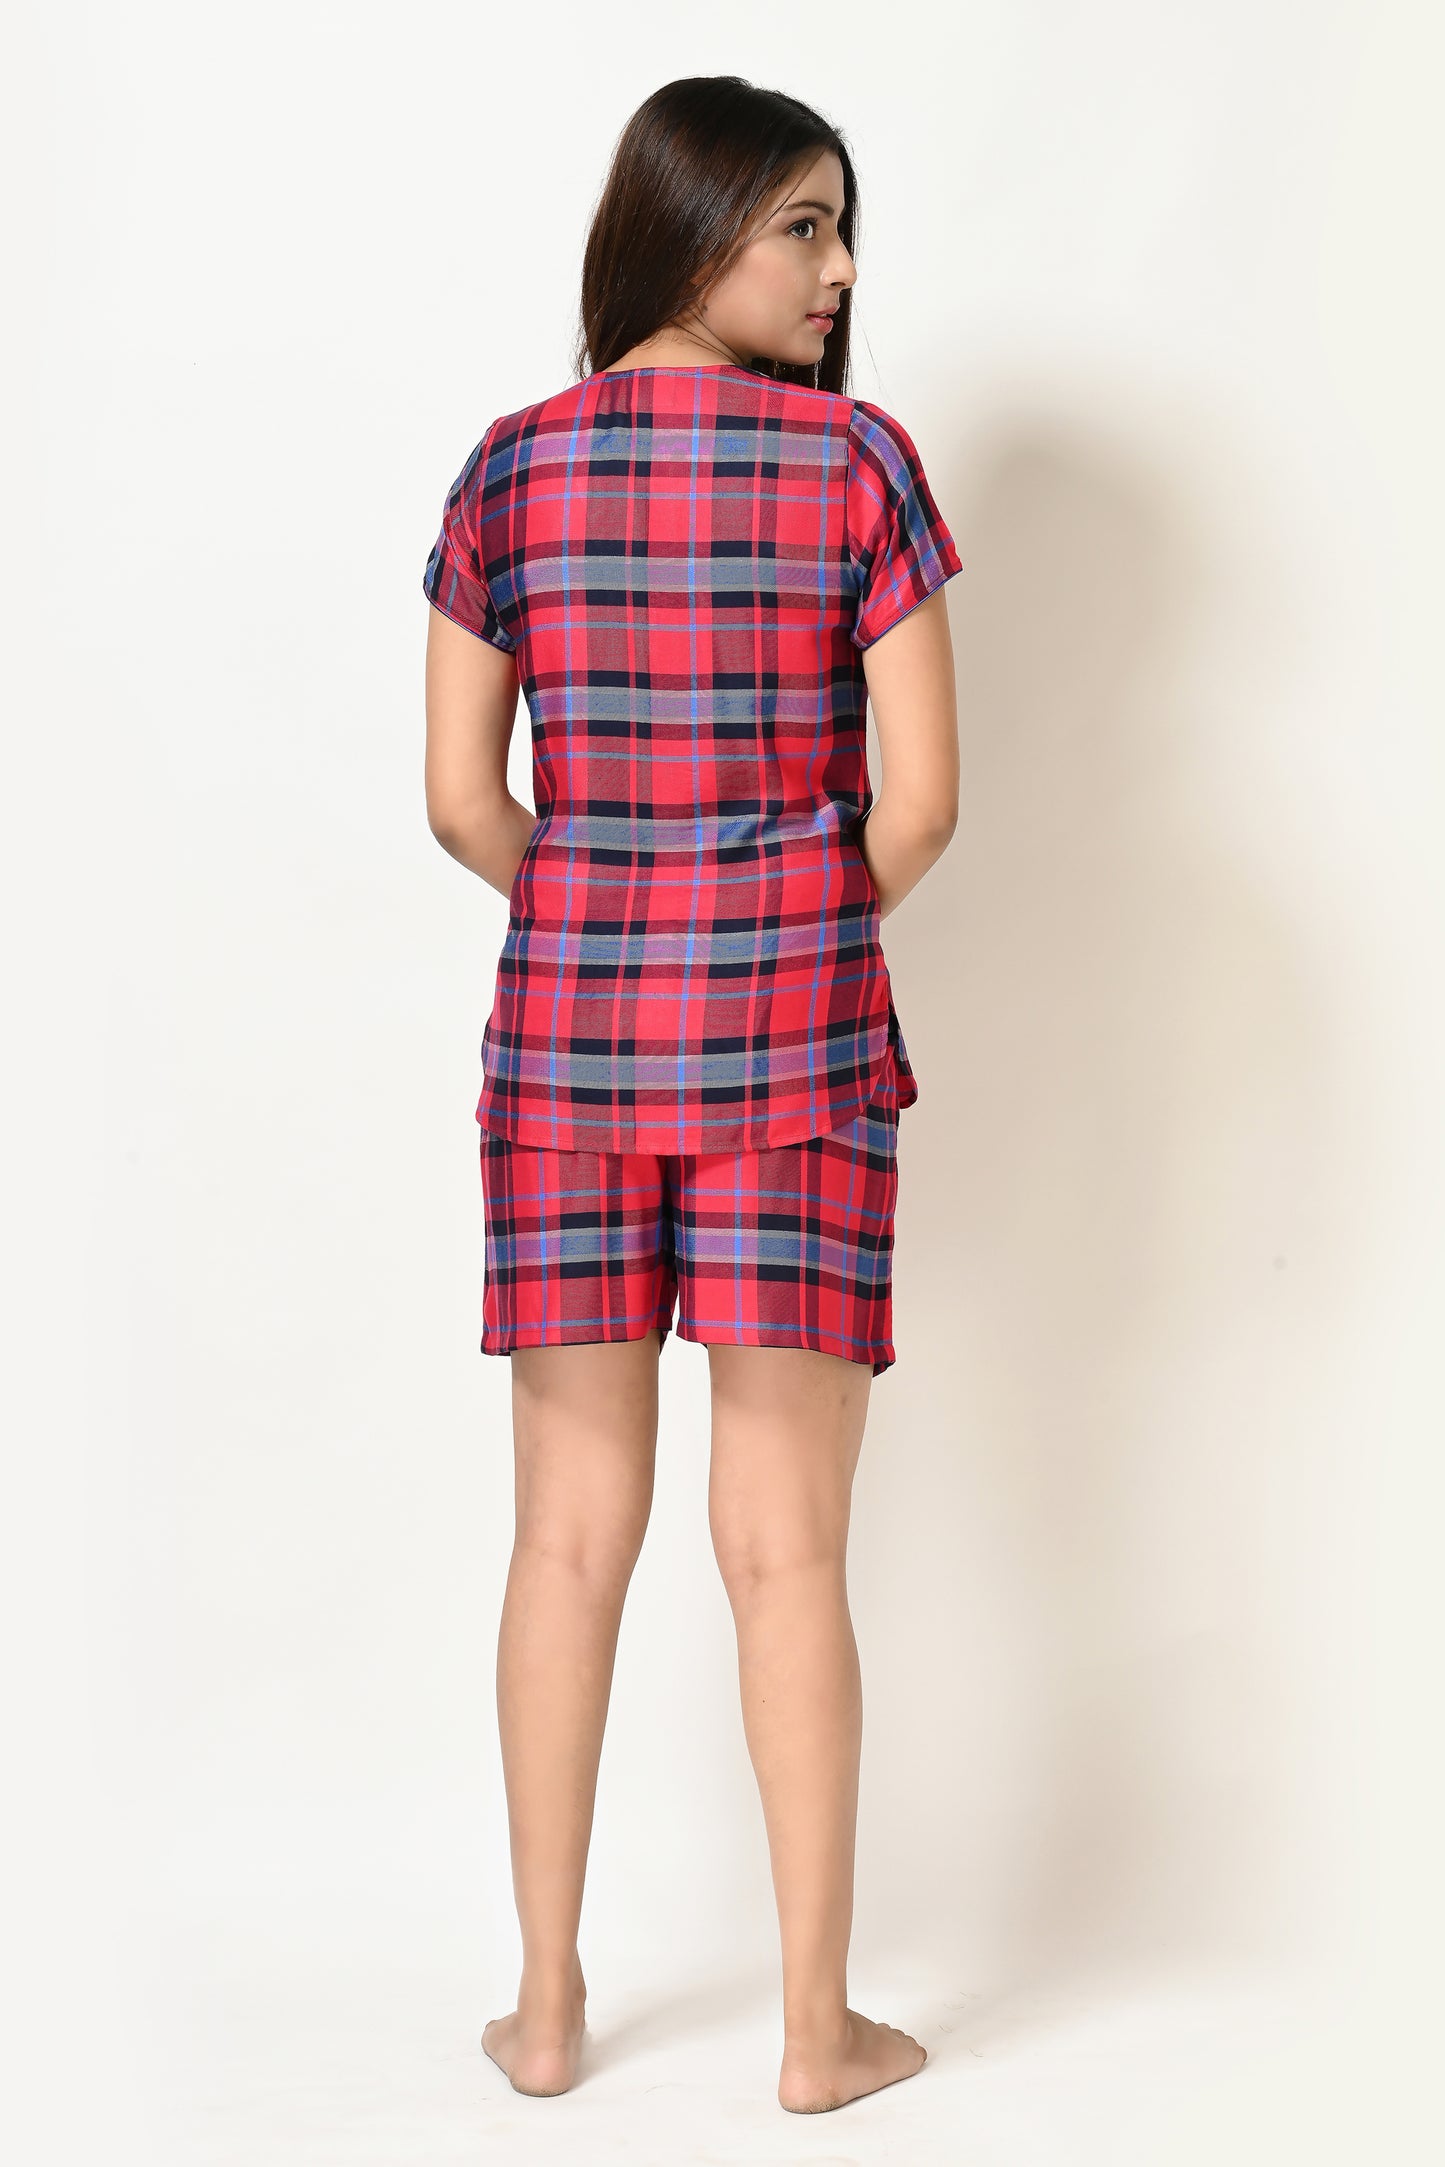 Women Red And Blue Checks Top and Short Cotton Rayon Nightwear Set